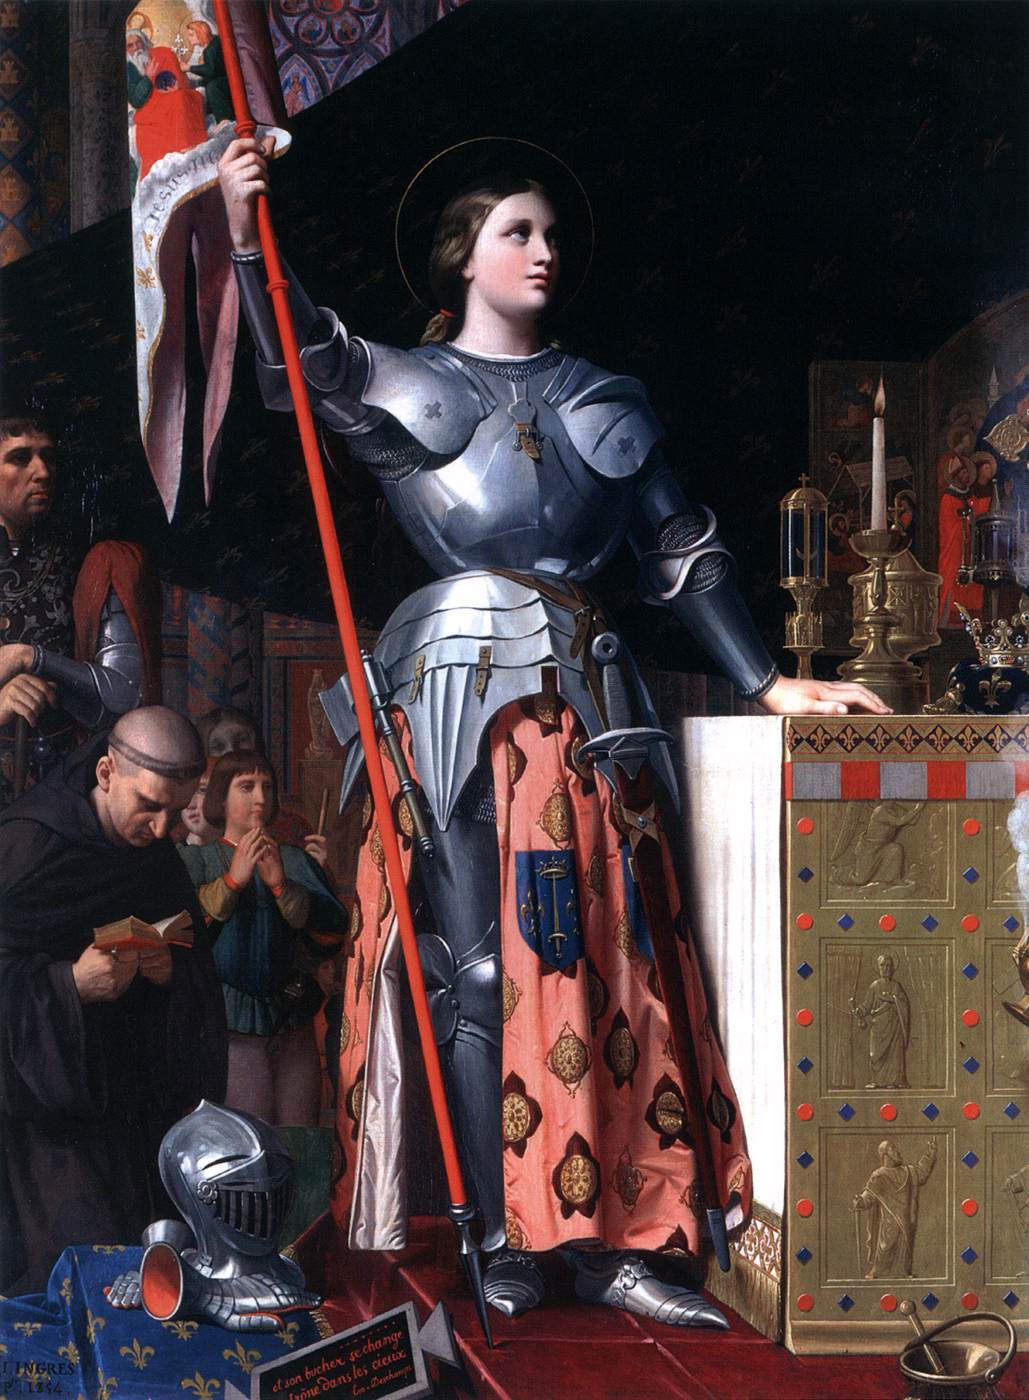 Joan of Arc in The Coronation of Charles VII in Reims Cathedral